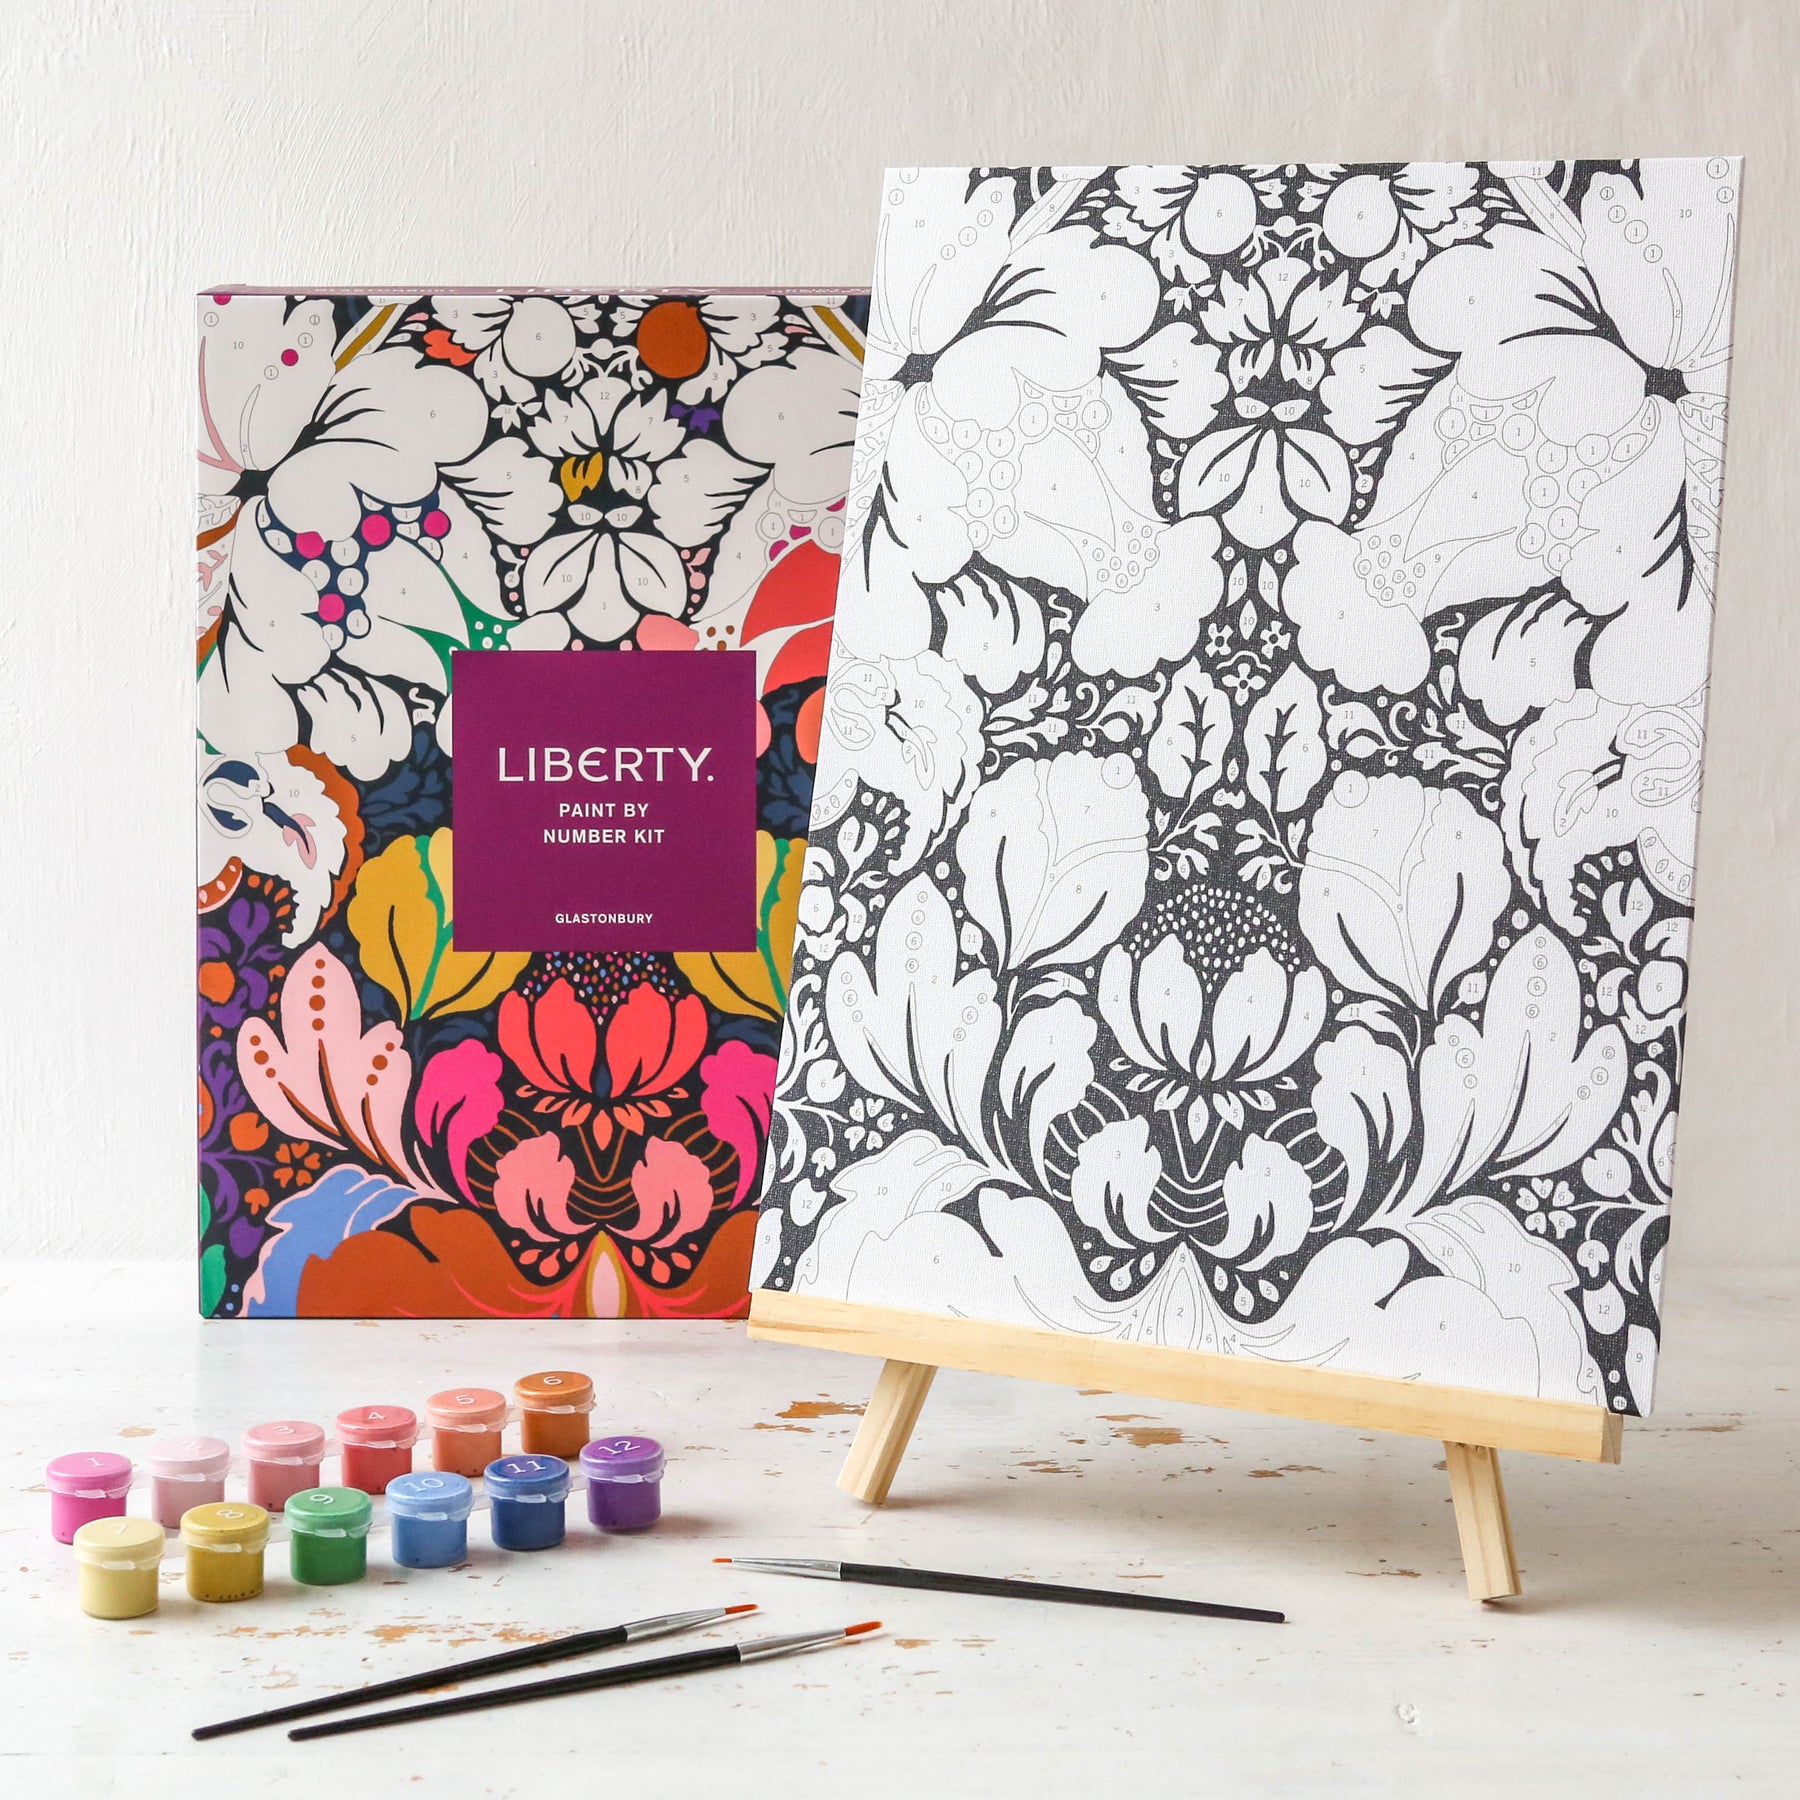 Galison Liberty Glastonbury – DIY Paint by Number Kit with Stunning Floral  Foliage Design for Beginners and Experts Includes Easel Paint and Brushes